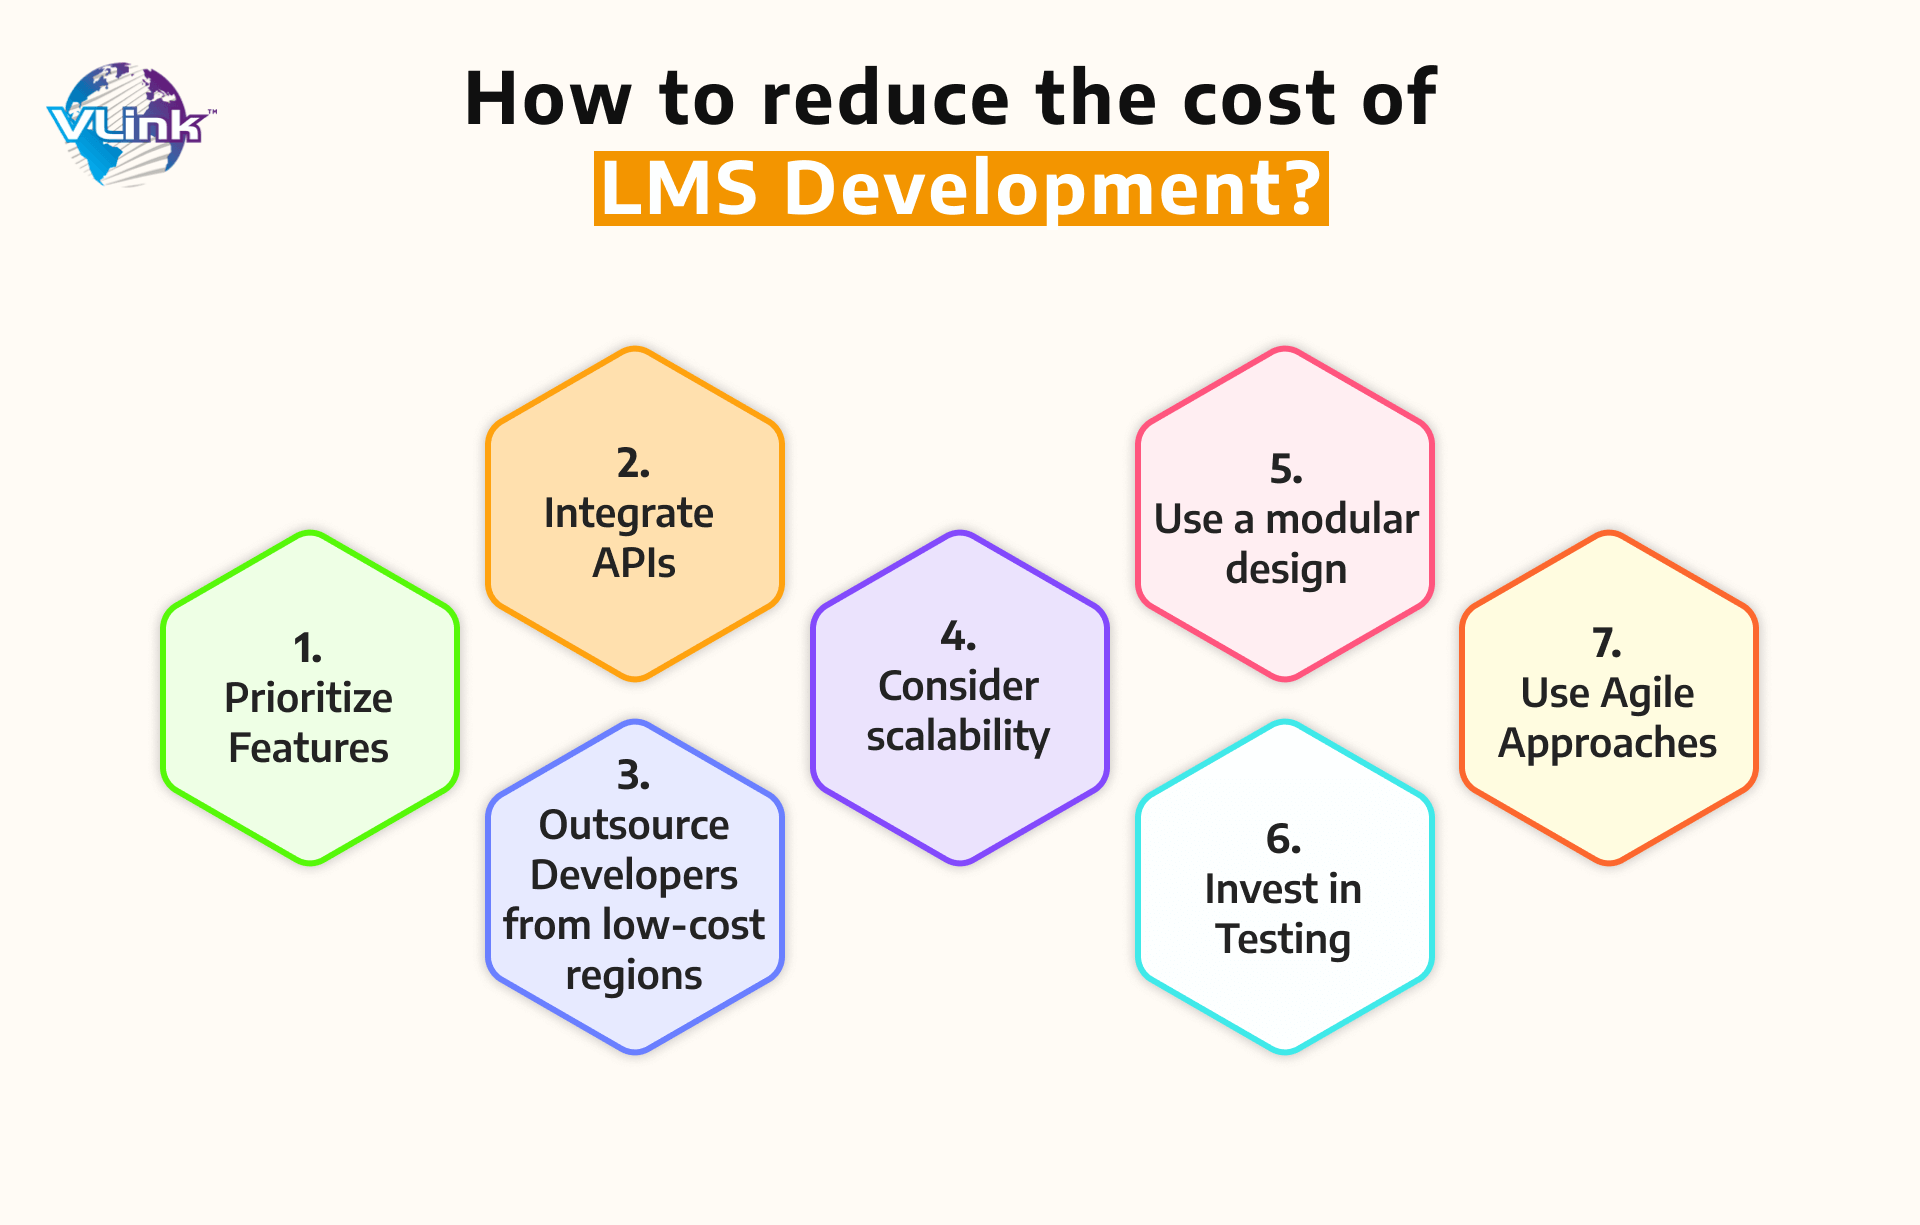 How to Reduce the Cost of LMS Development